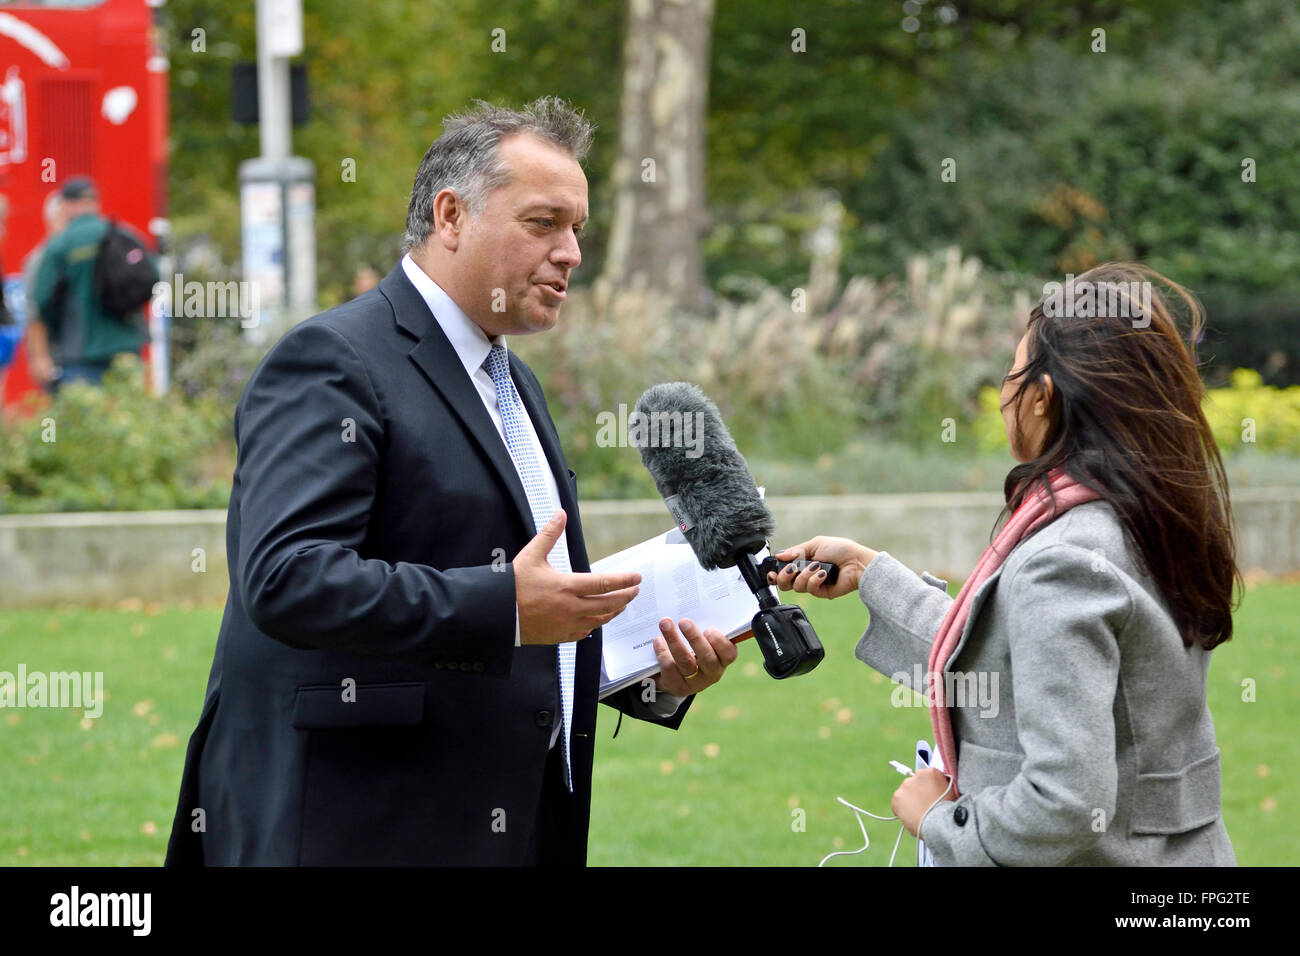 David Warburton MP (Conservative: Somerton and Frome) being interviewed on College Green, Westminster Stock Photo